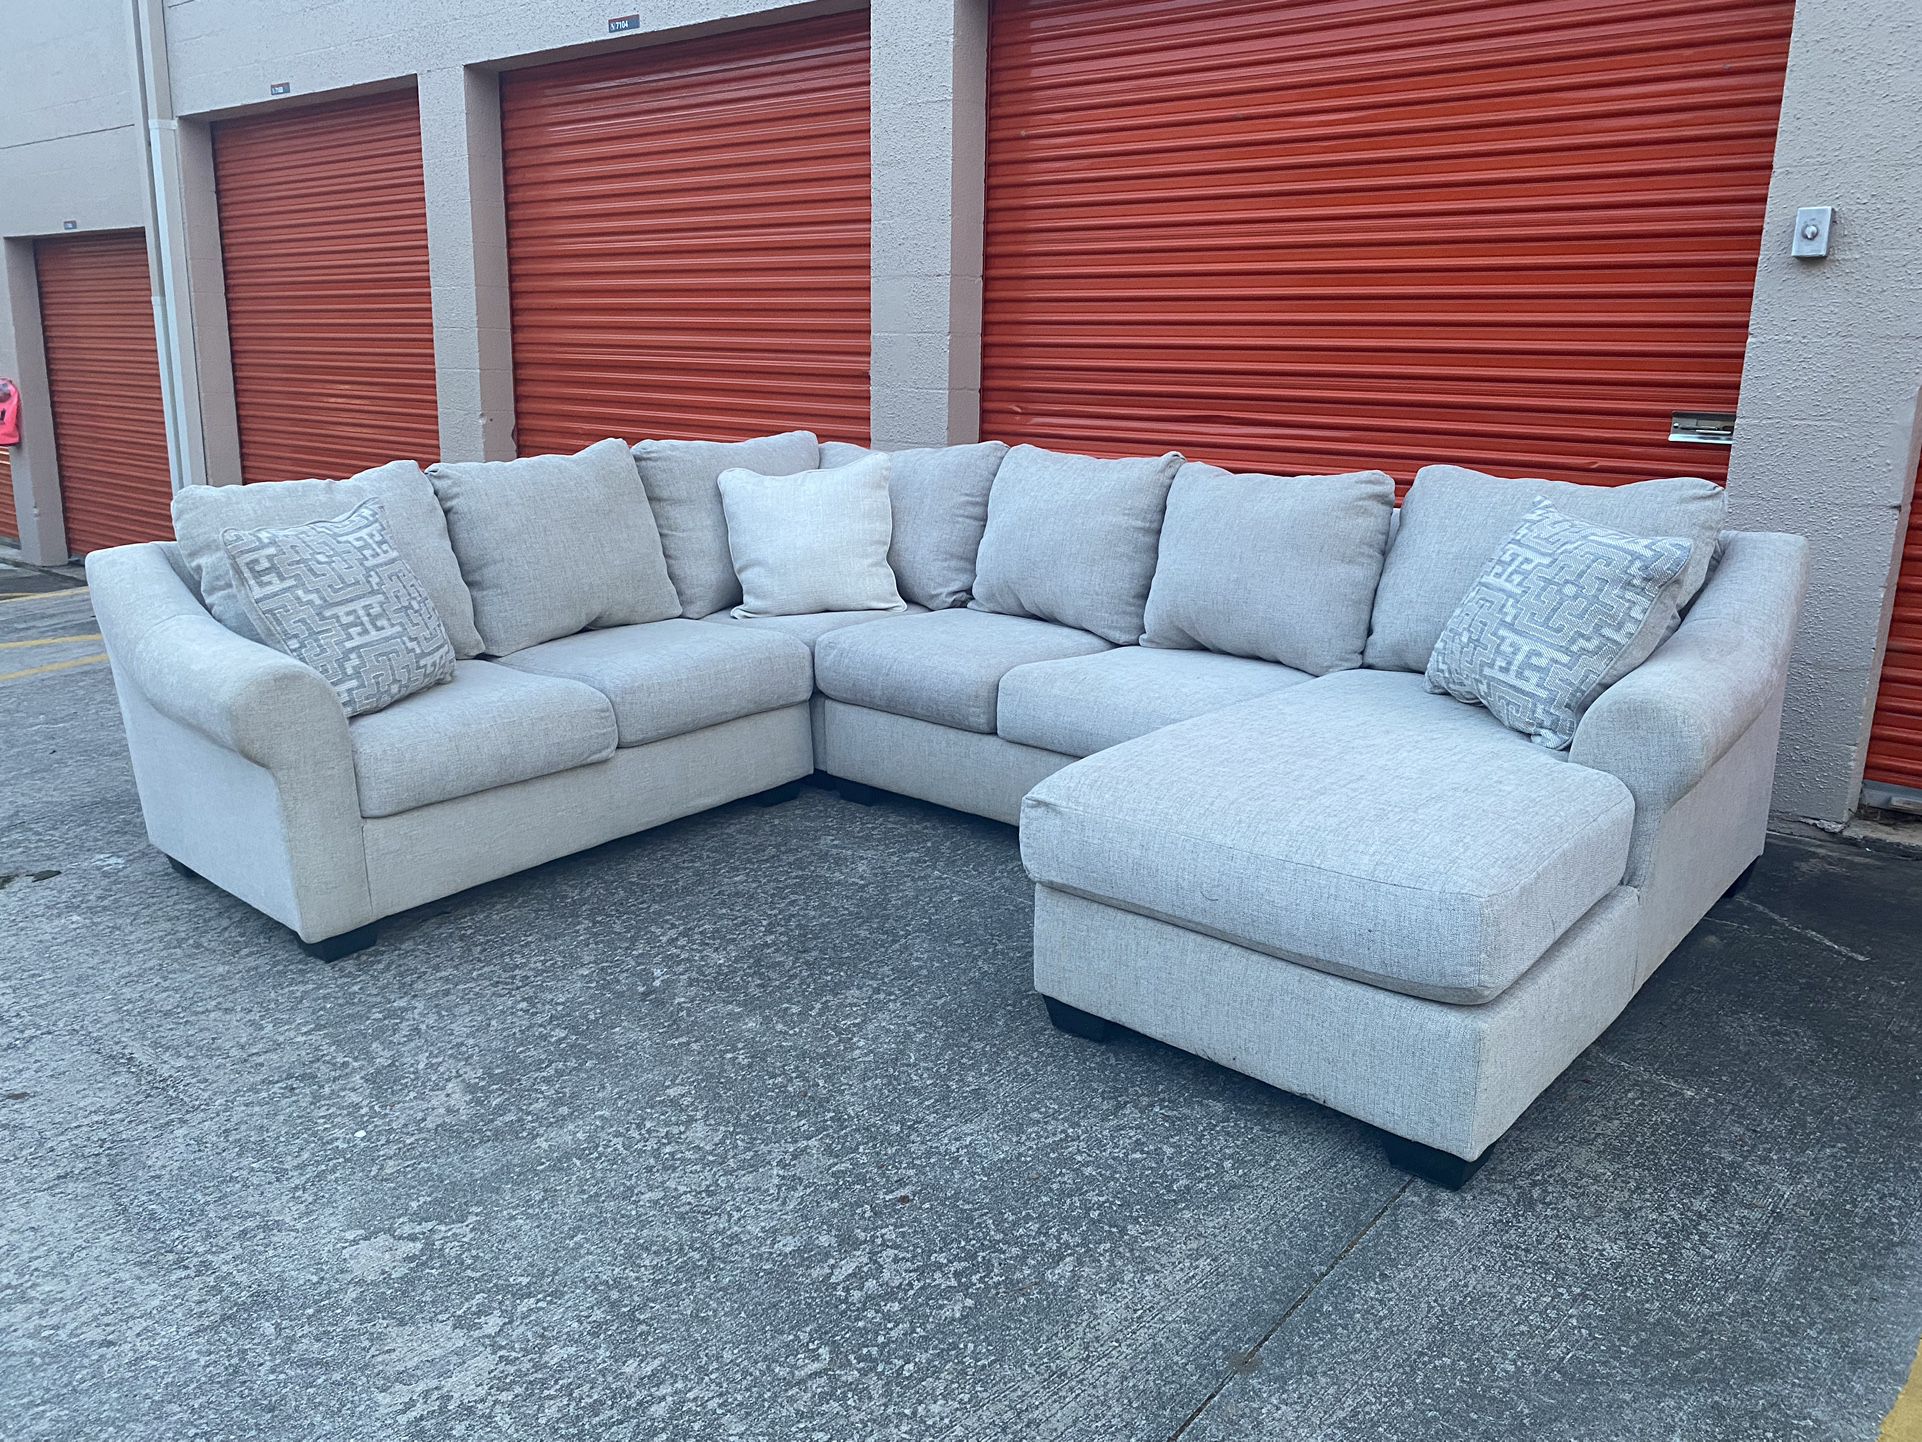 *Free Delivery* Light Grey/Beige Ashley Furniture Sectional and Throw Pillows